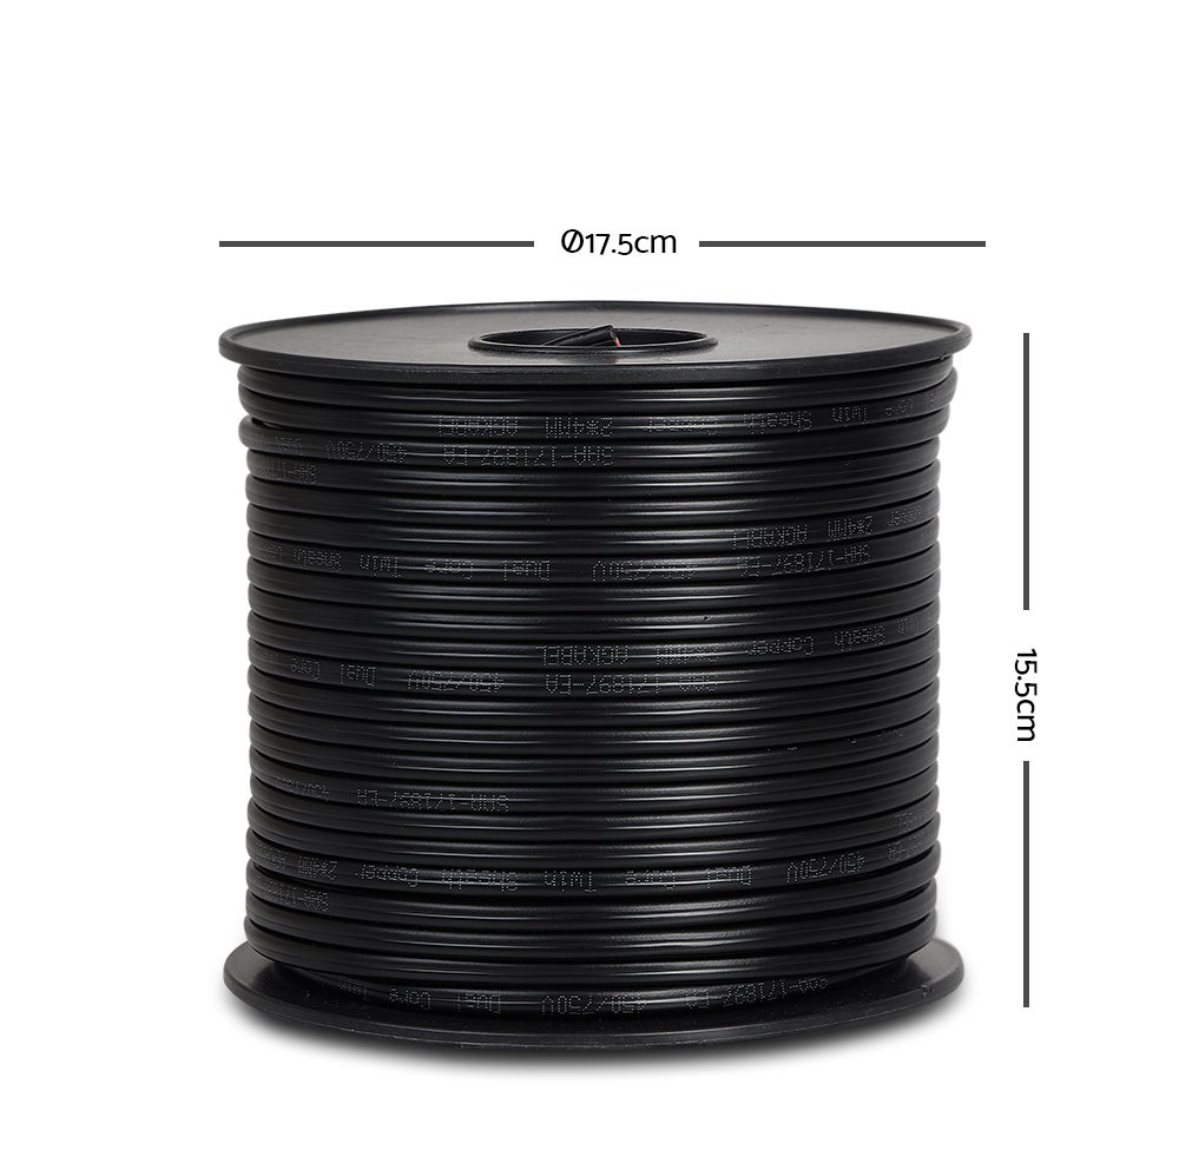 Cable package dimensions: 175mm * 155mm